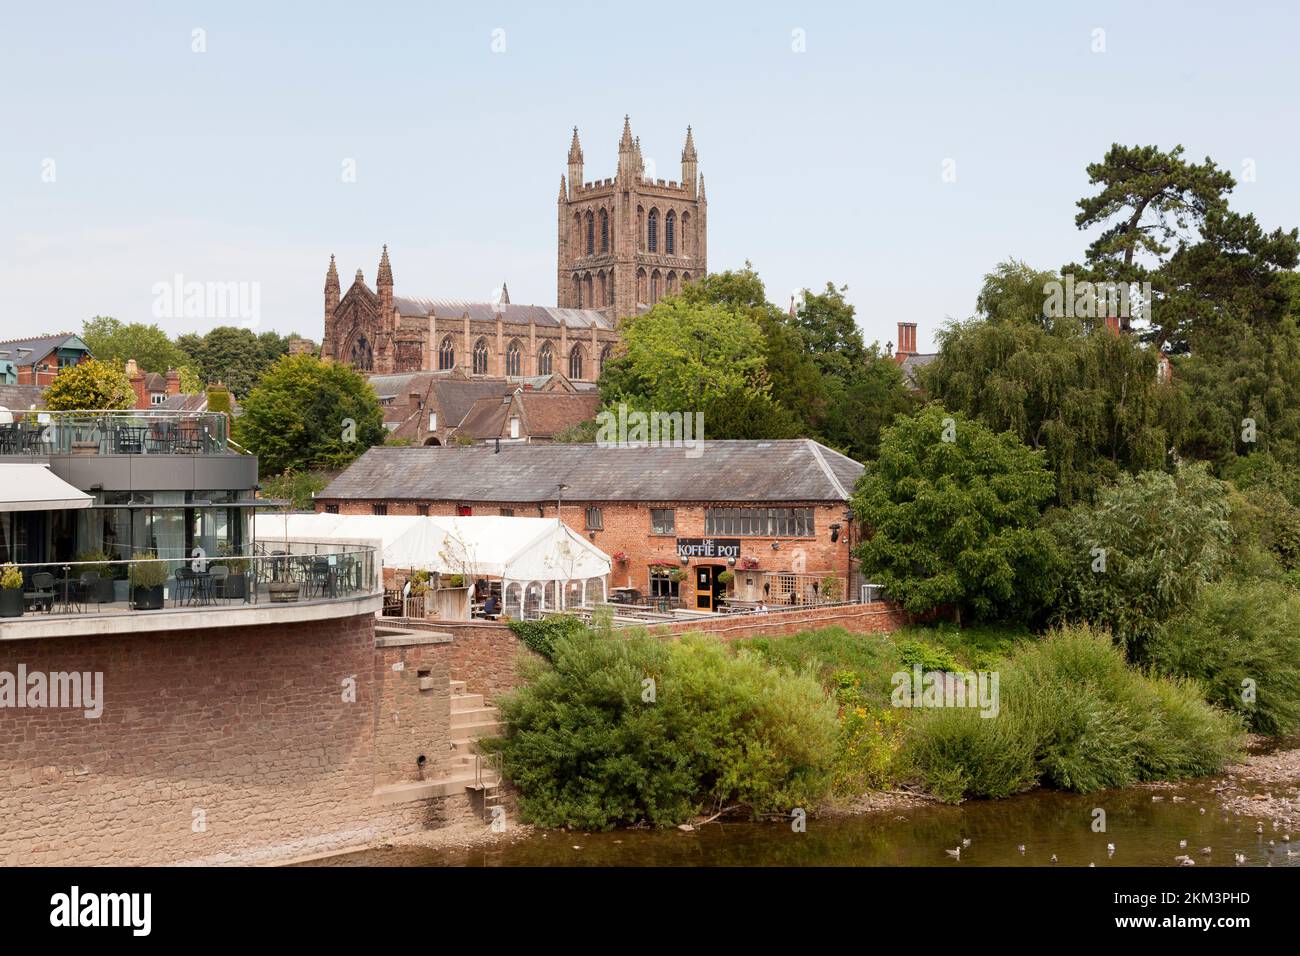 View of the cathedral, with the Koffie Pot restaurant beside the River Wye, Hereford, Herefordshire Stock Photo